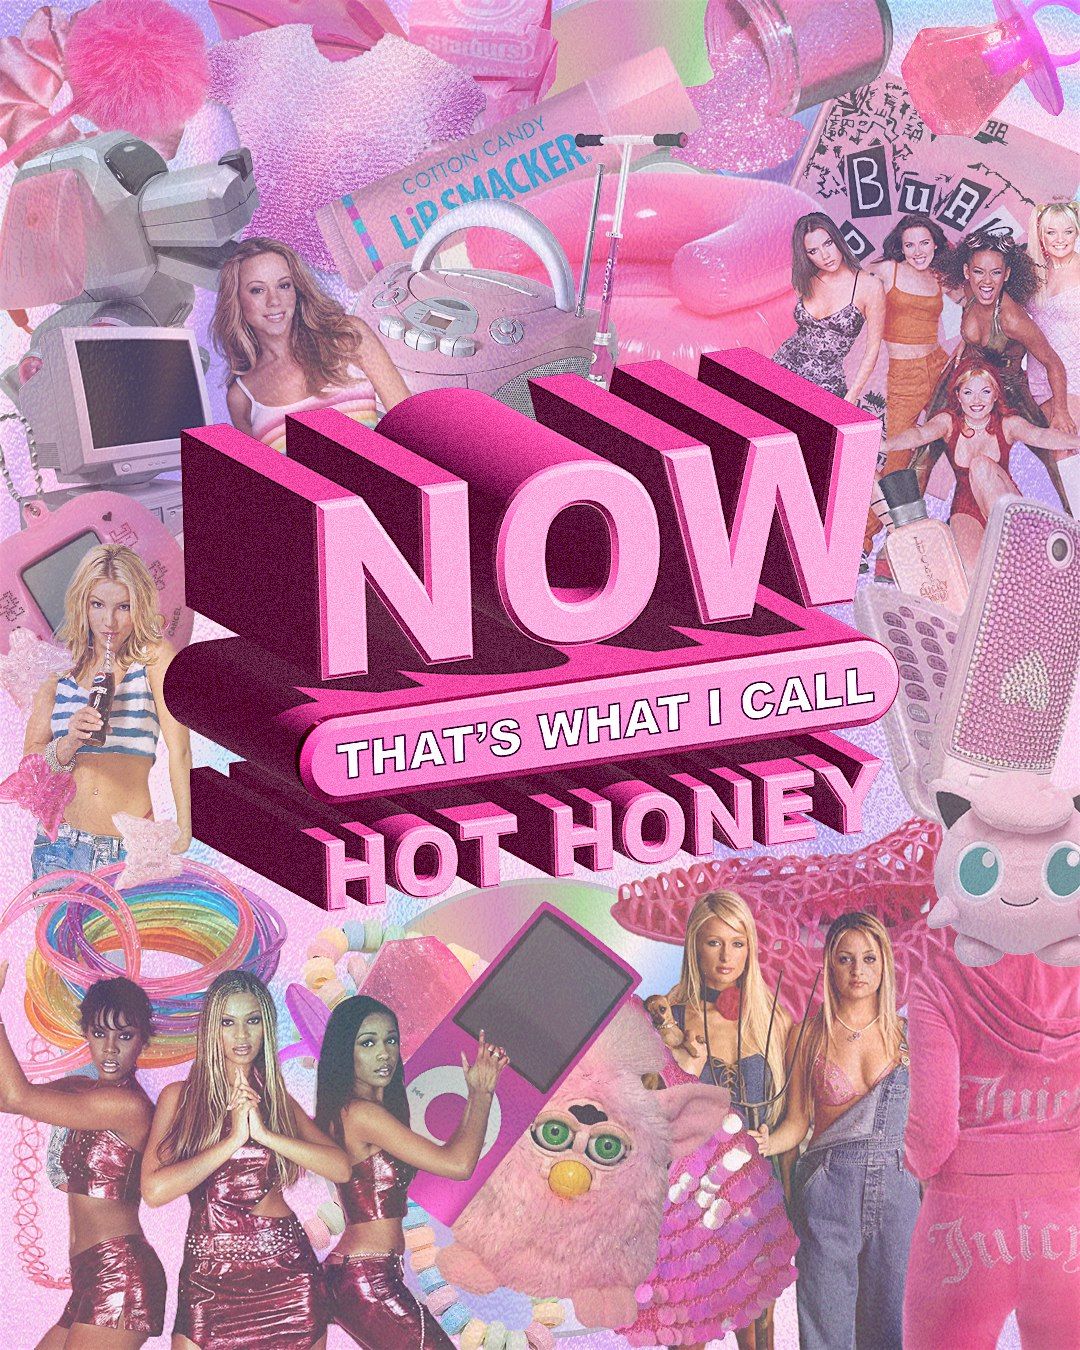 NOW!  That's What I Call Hot Honey - LGBTQ Women Centered Dance Party